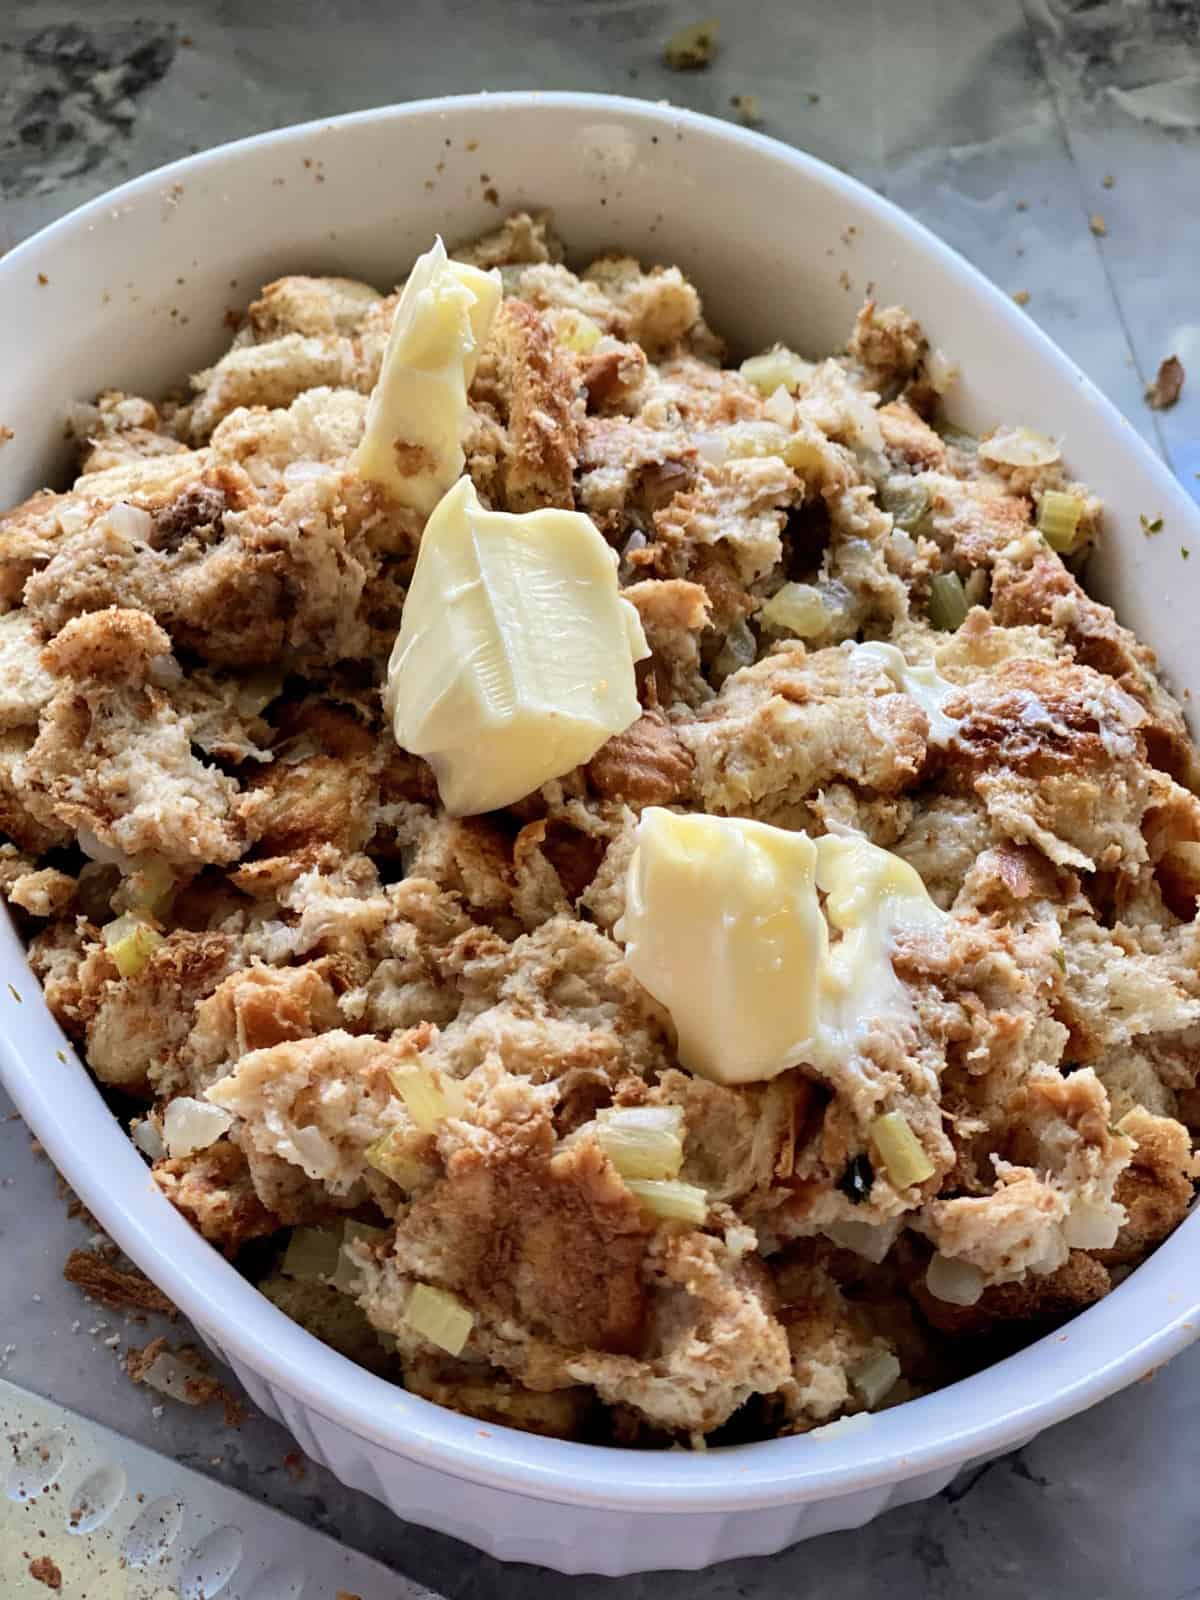 White casserole dish with bread stuffing and chunks of unmelted soft butter on top.